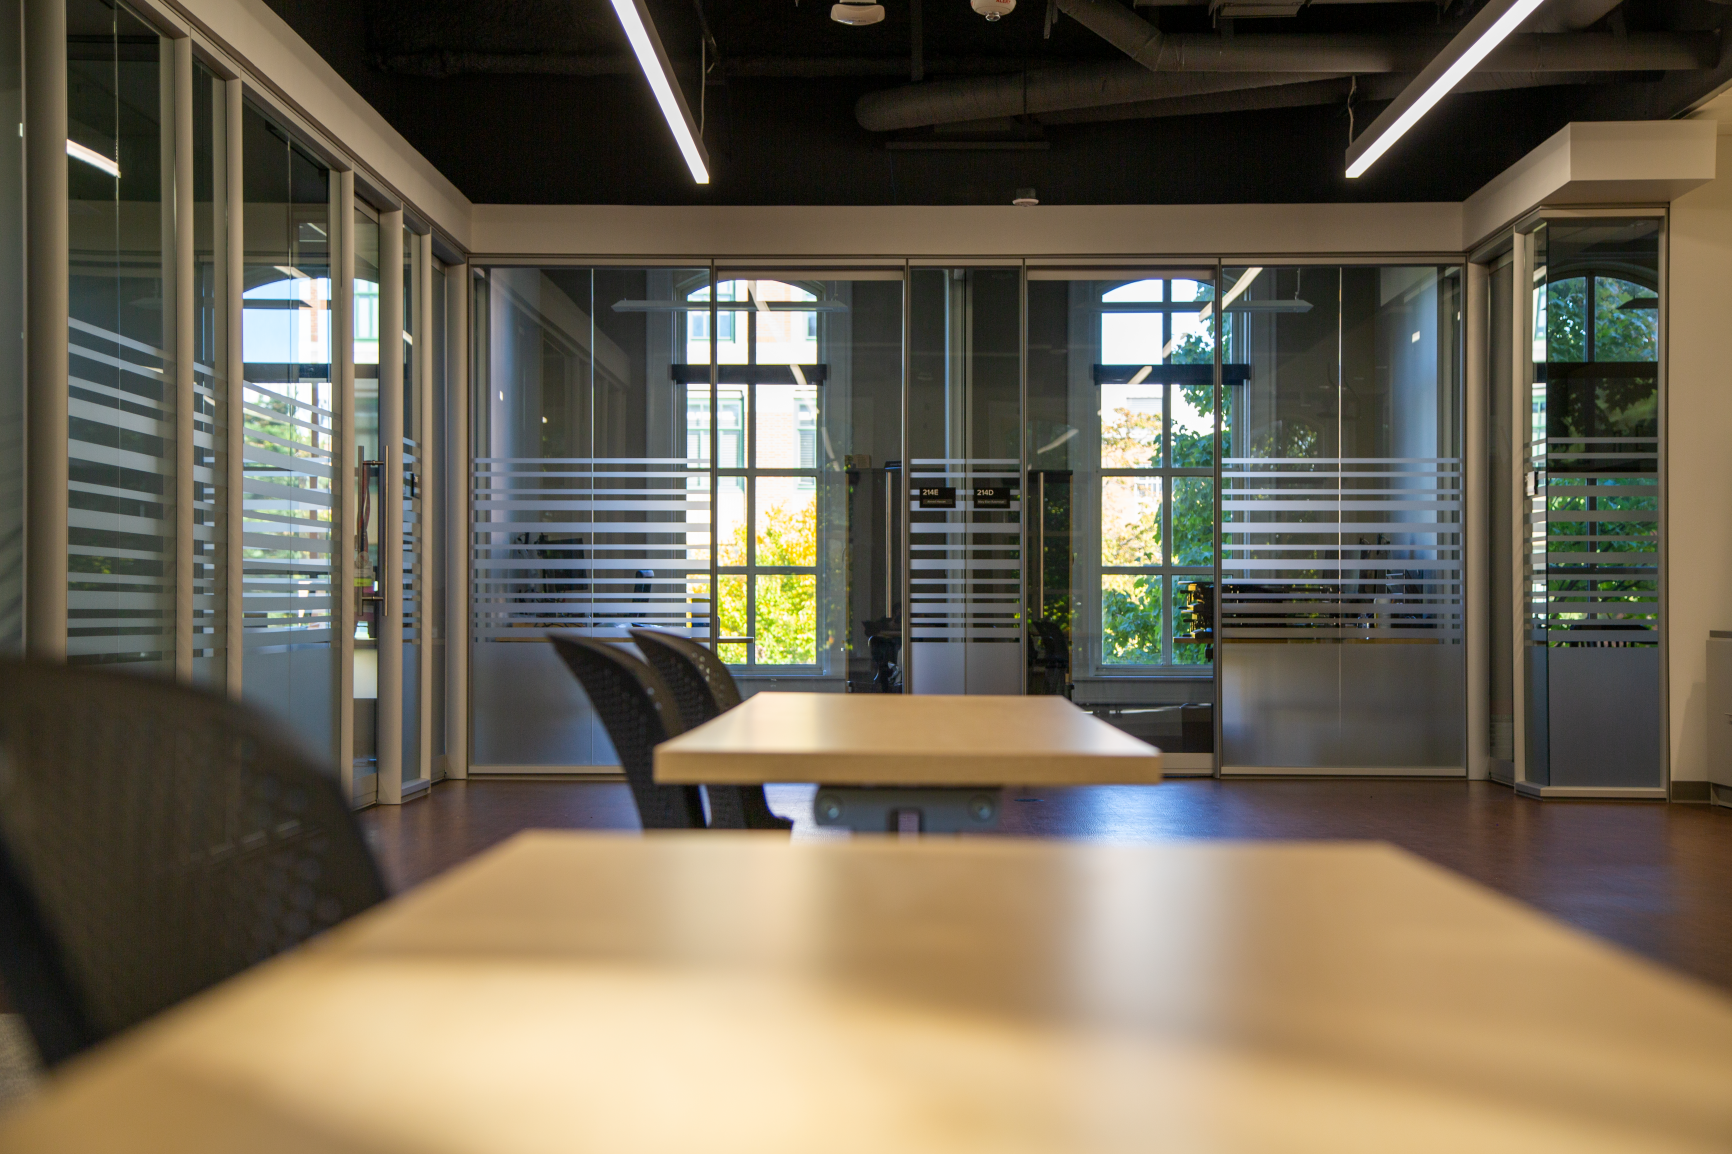 More private offices can be found off of the classroom are, with a large open space that can be used for anything!